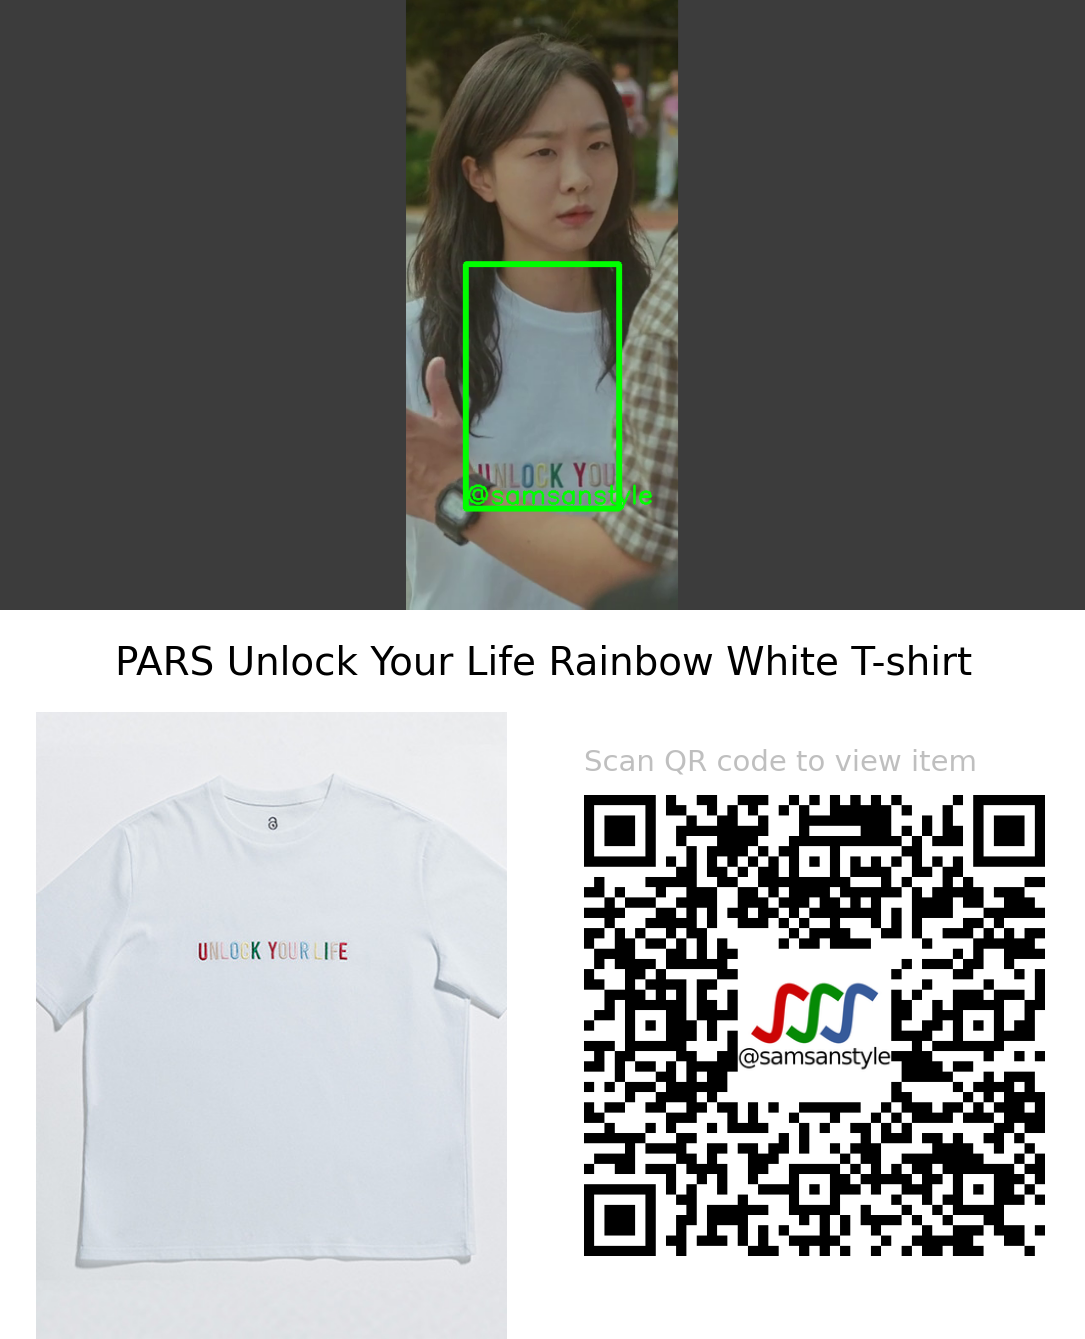 Kim Dami | Our Beloved Summer E03 | PARS Unlock Your Life Rainbow White T-shirt